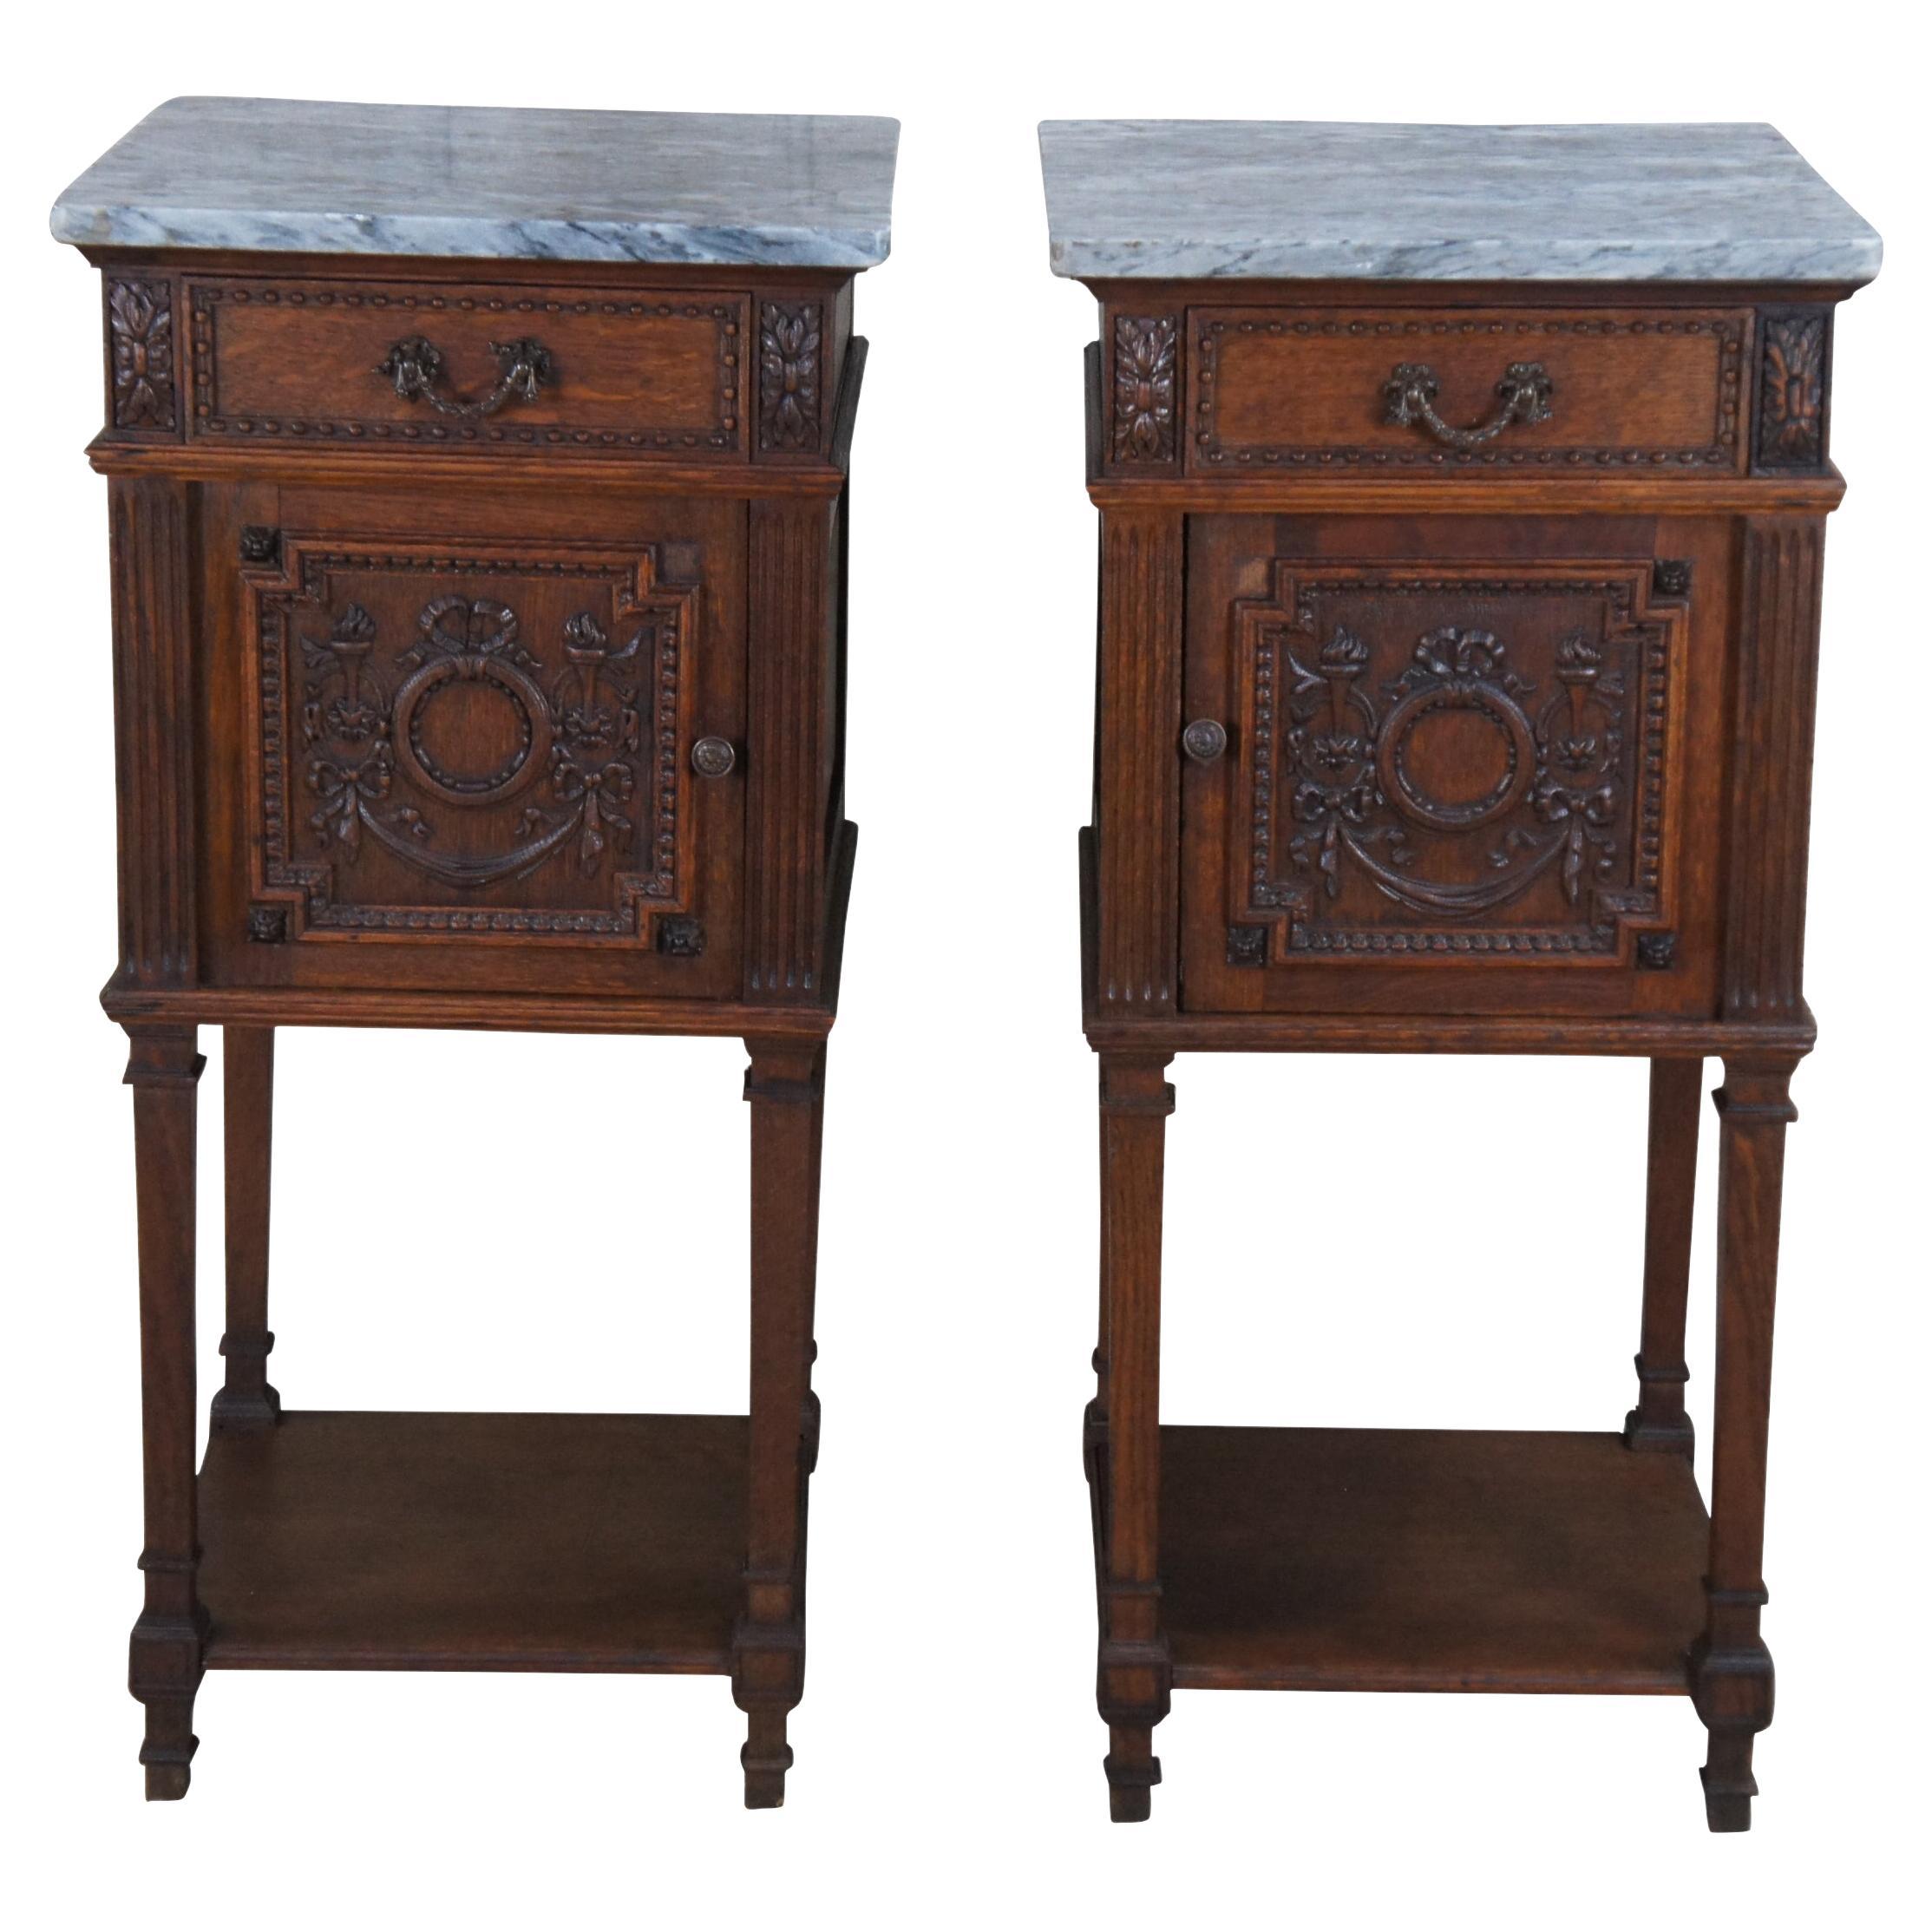 2 Antique French Neoclassical Quartersawn Oak Marble Nightstands Smoking Stands For Sale